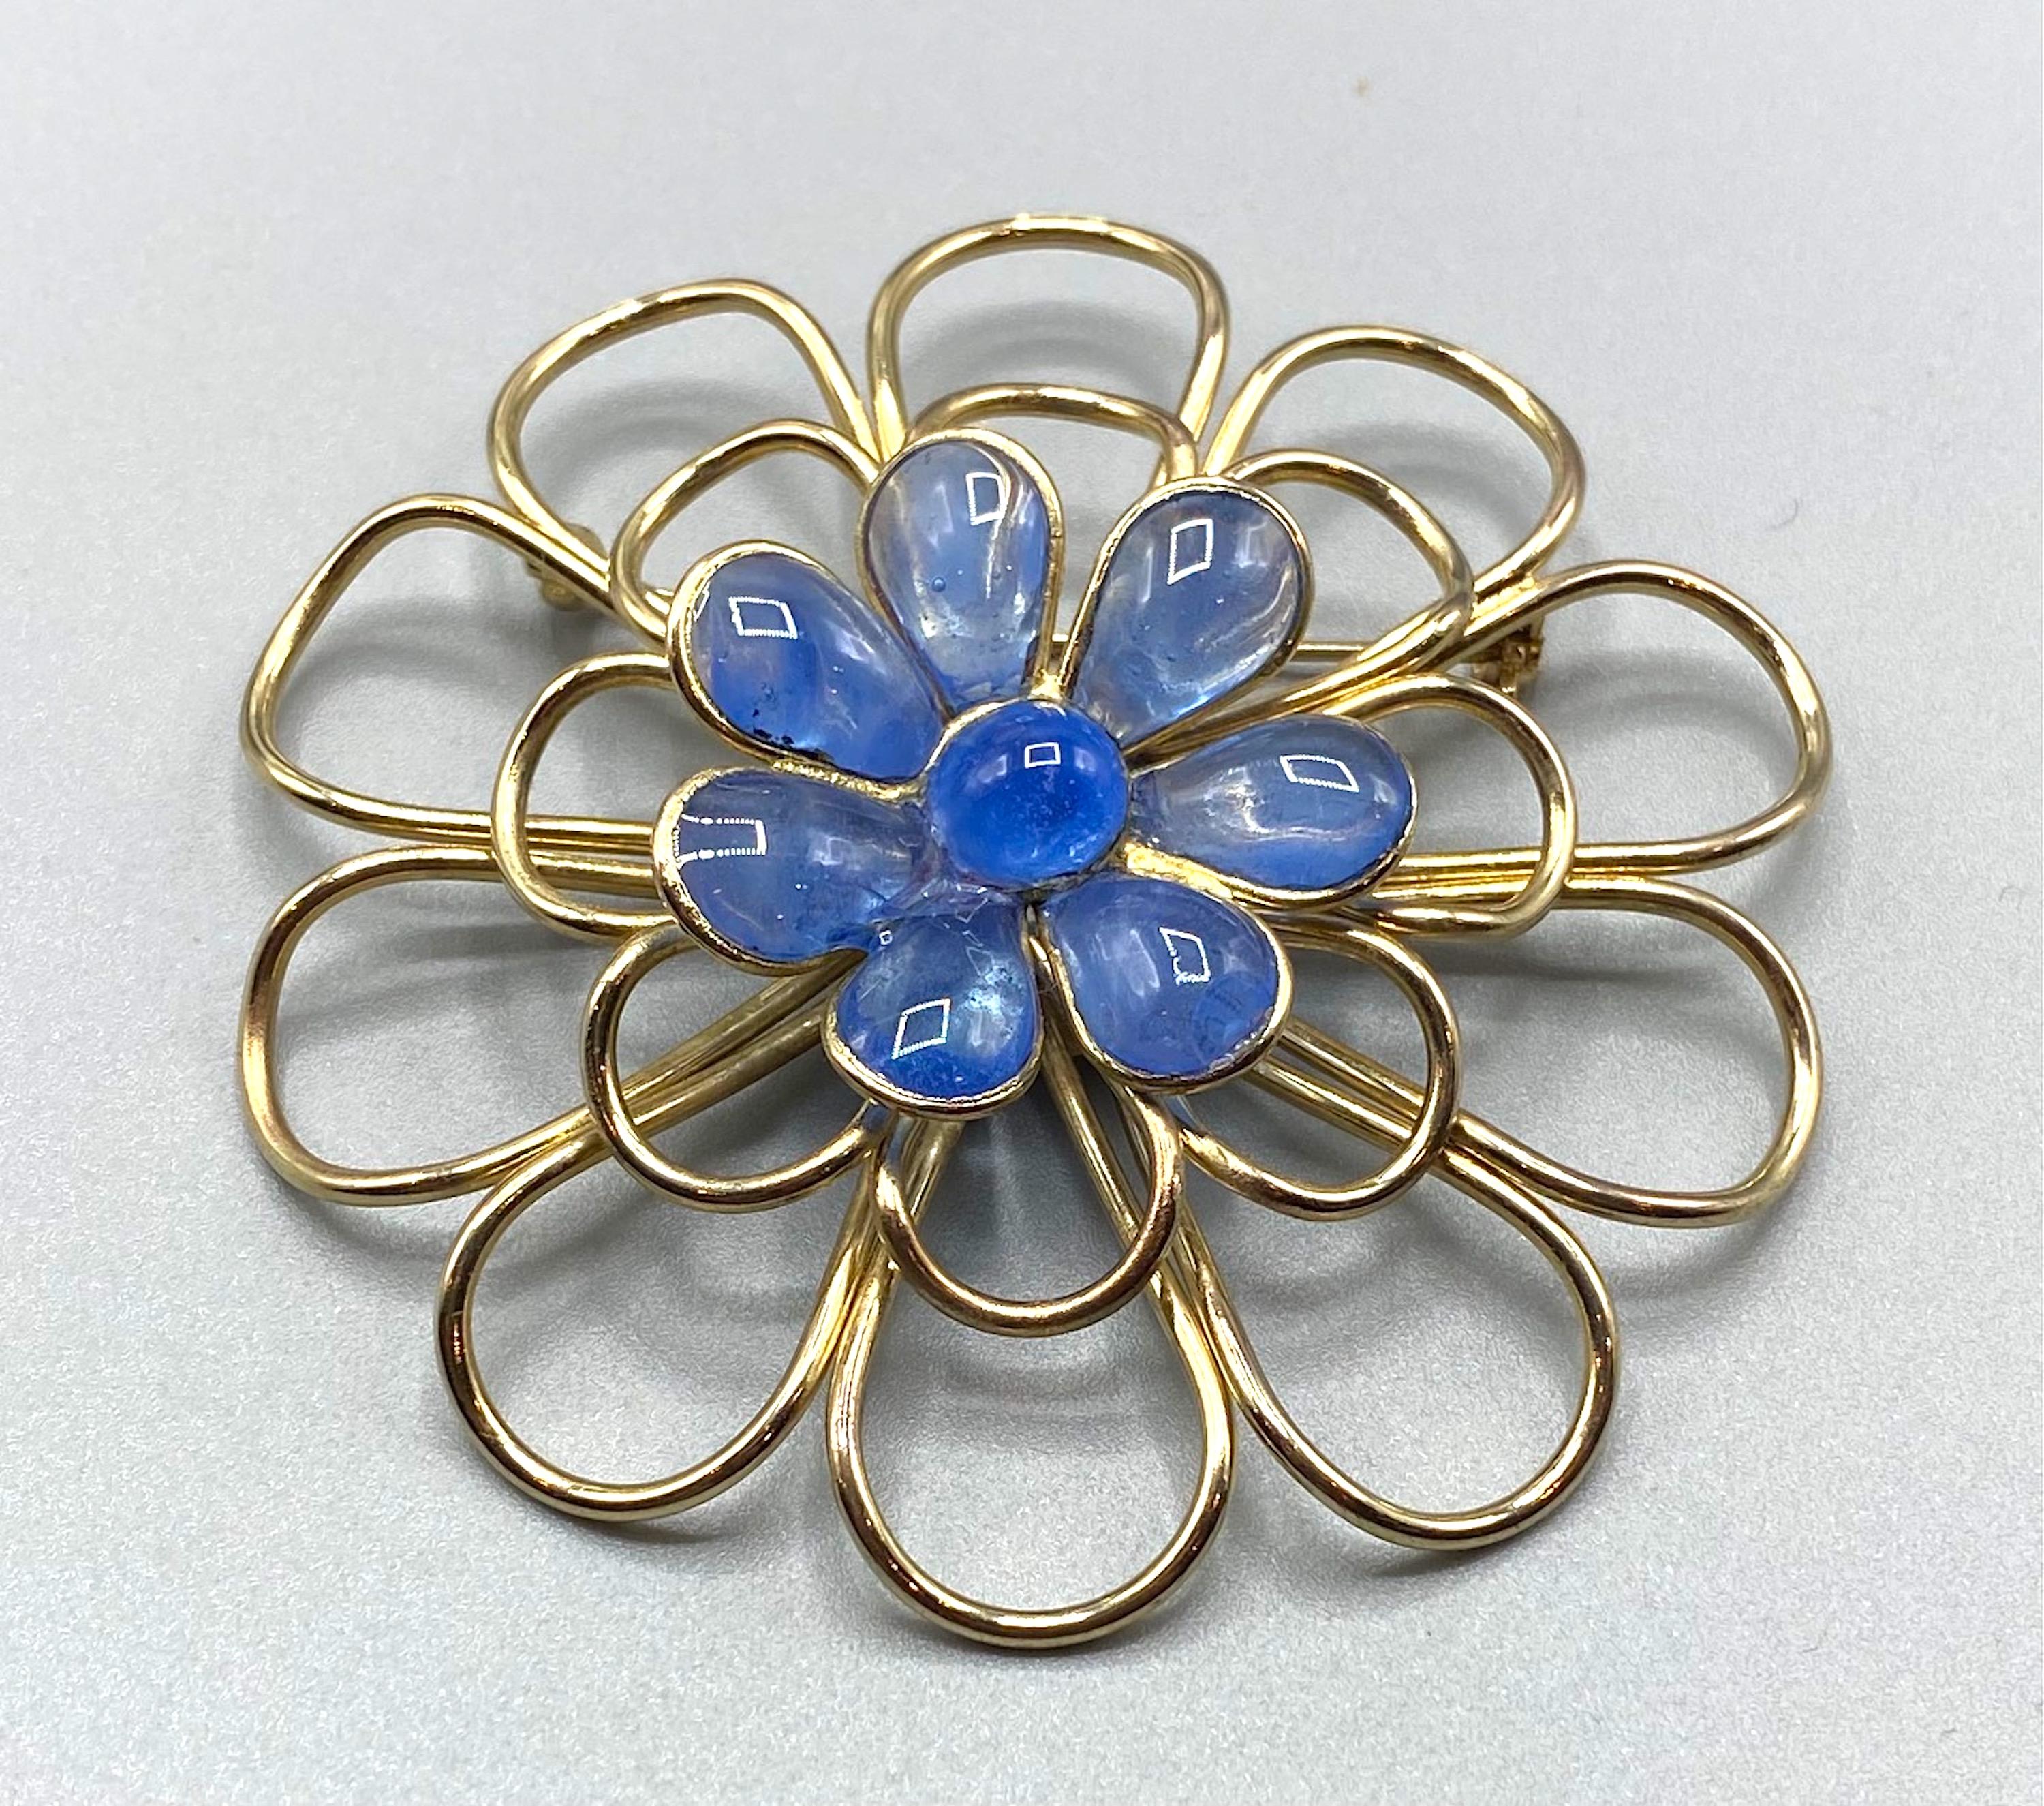 A very rare and elegant Flower Brooch , by famous company Gripoix, open gold plated flower petals, with  poured Glass inclusion in the center, creating a small flower inside.
Signed Augustine by Thierry Gripoix in the back, measures 3